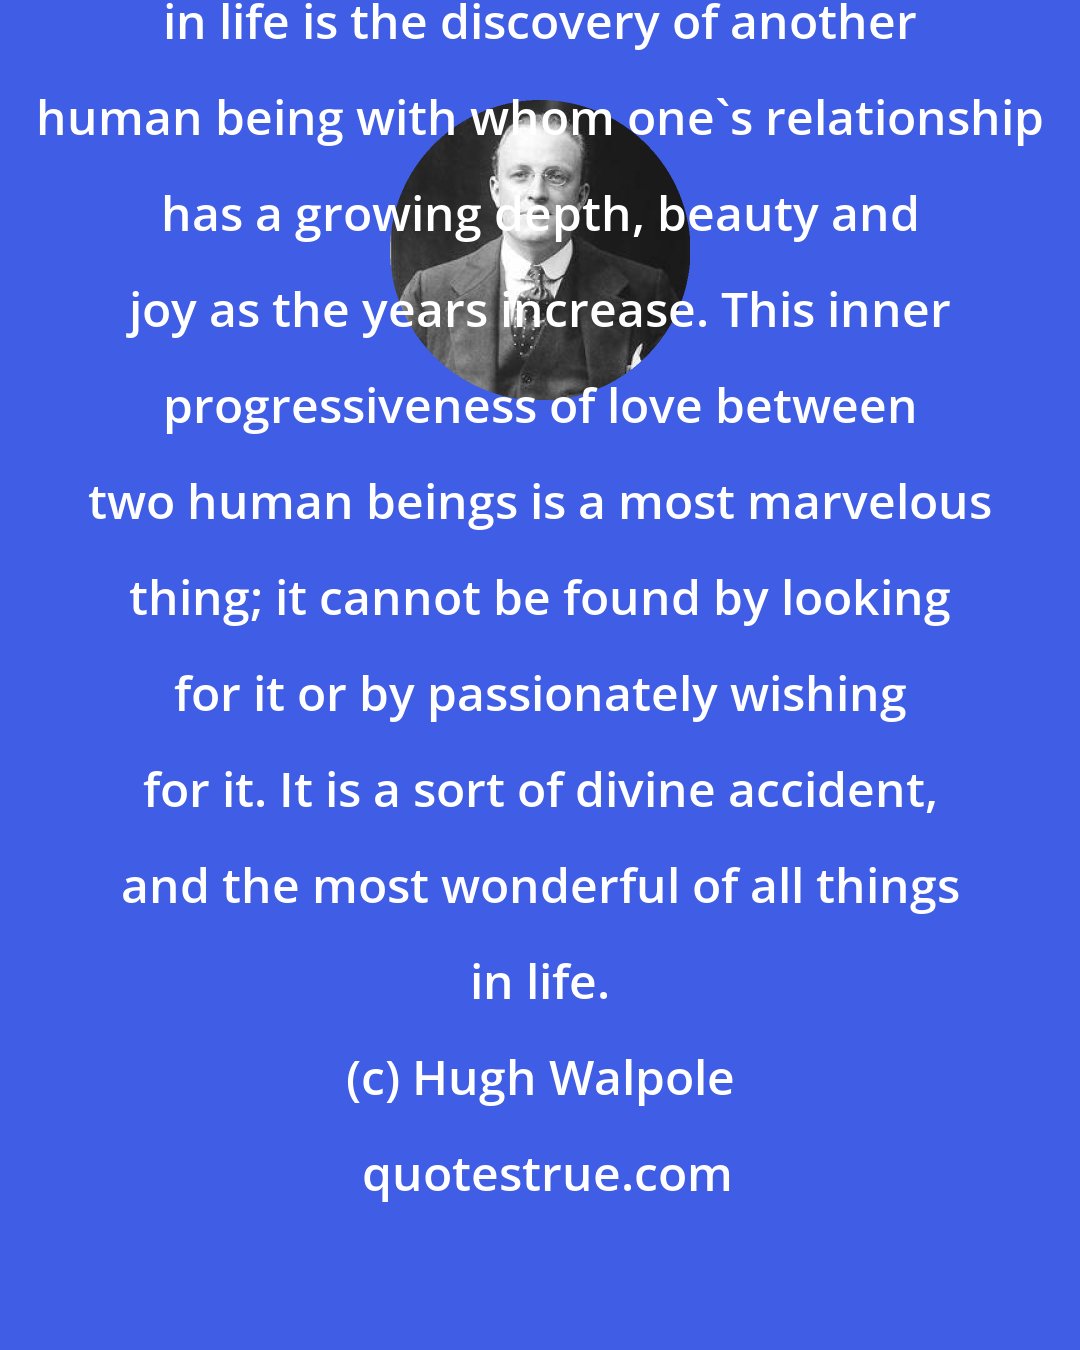 Hugh Walpole: The most wonderful of all things in life is the discovery of another human being with whom one's relationship has a growing depth, beauty and joy as the years increase. This inner progressiveness of love between two human beings is a most marvelous thing; it cannot be found by looking for it or by passionately wishing for it. It is a sort of divine accident, and the most wonderful of all things in life.